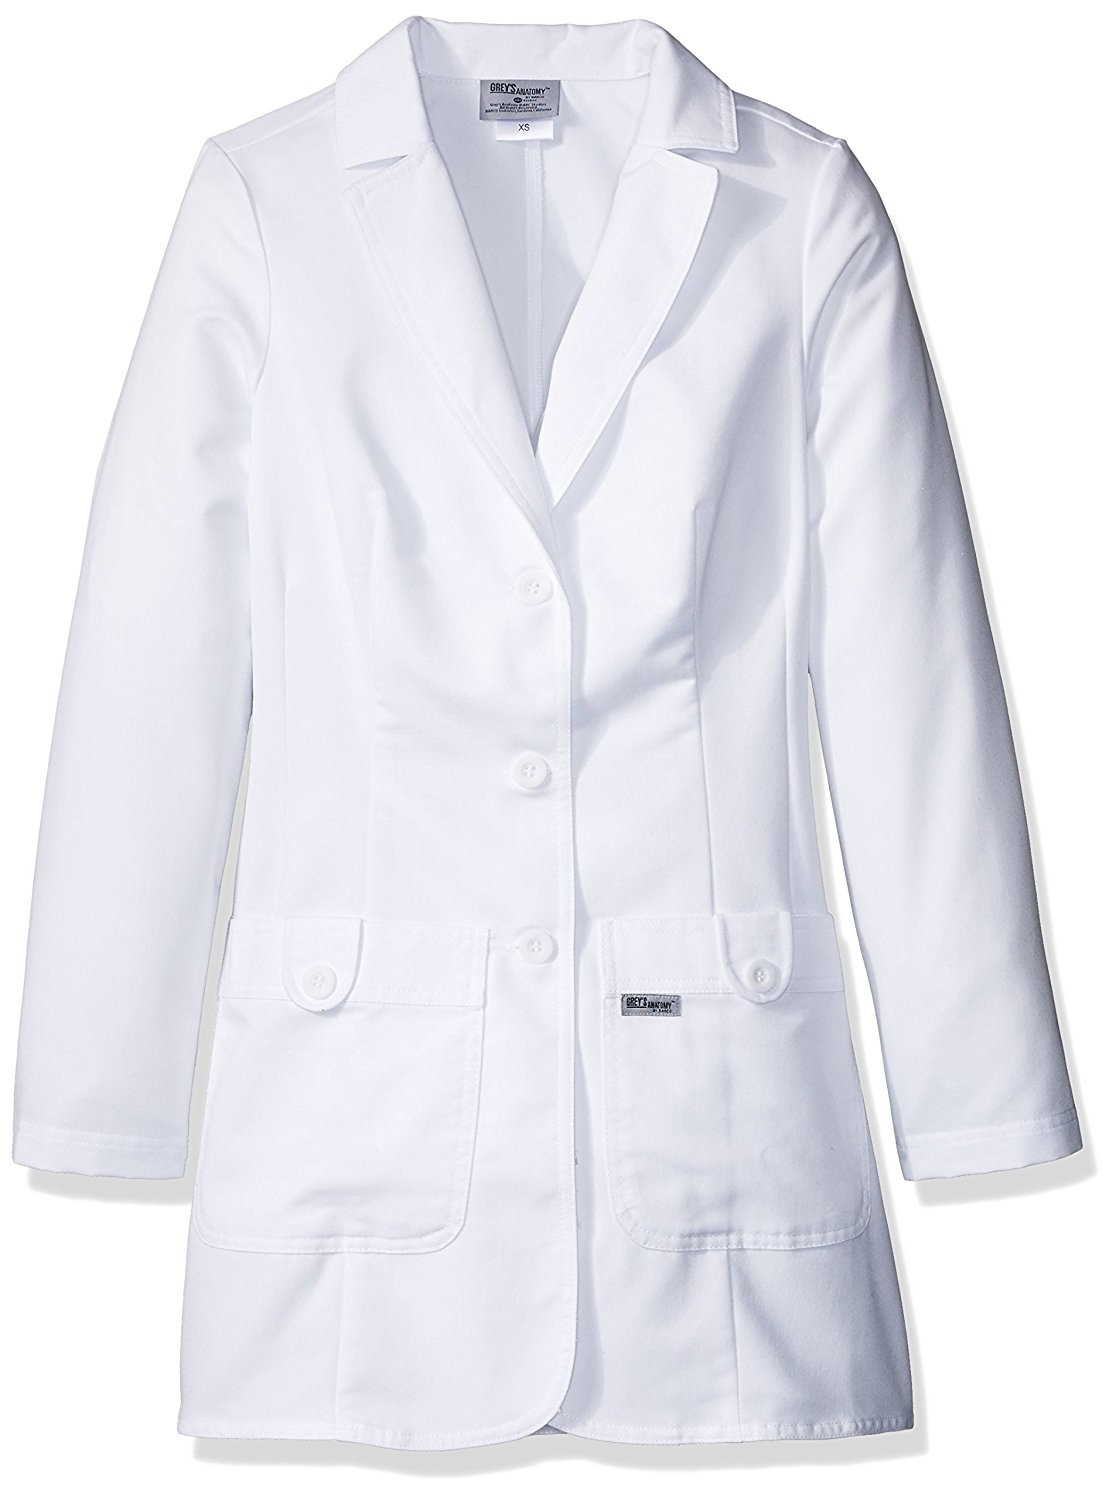 Grey's Anatomy Women's Two Pocket Fitted Lab Coat